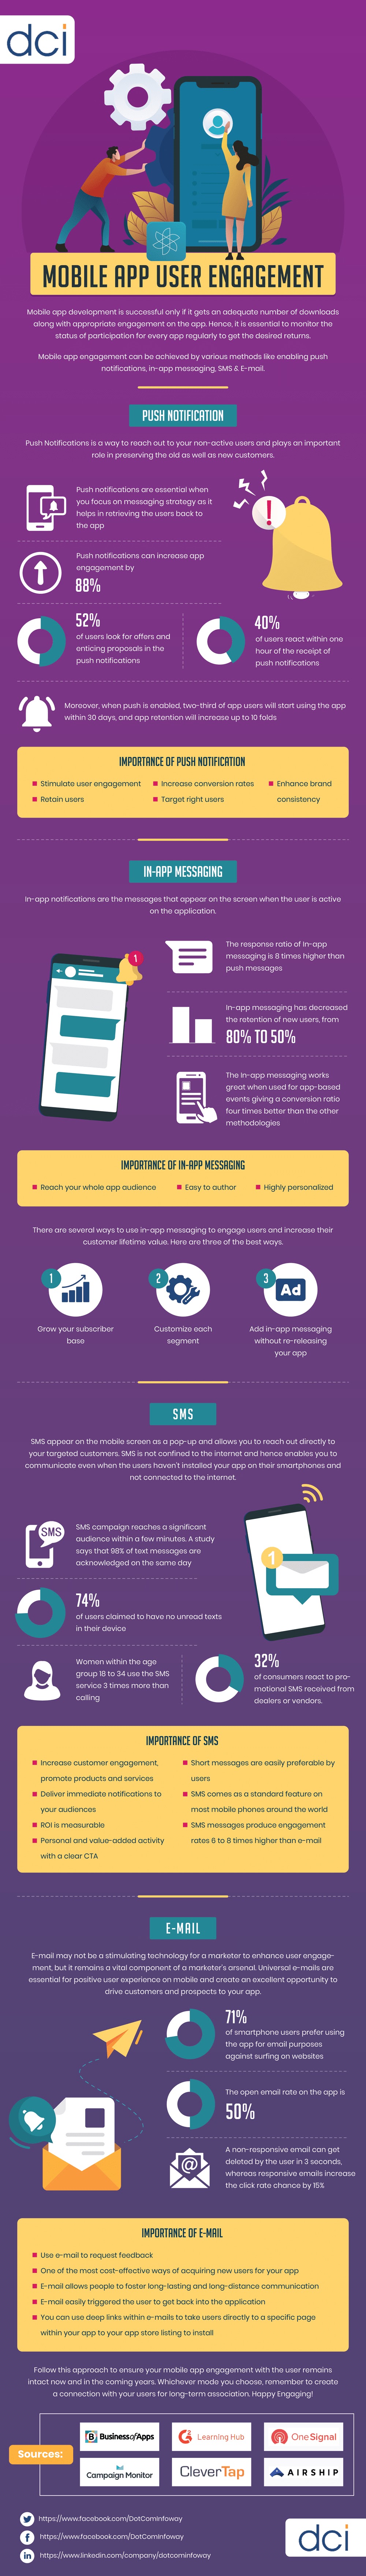 Mobile Apps: Tips on How to Engage Your App Users [Infographic]

